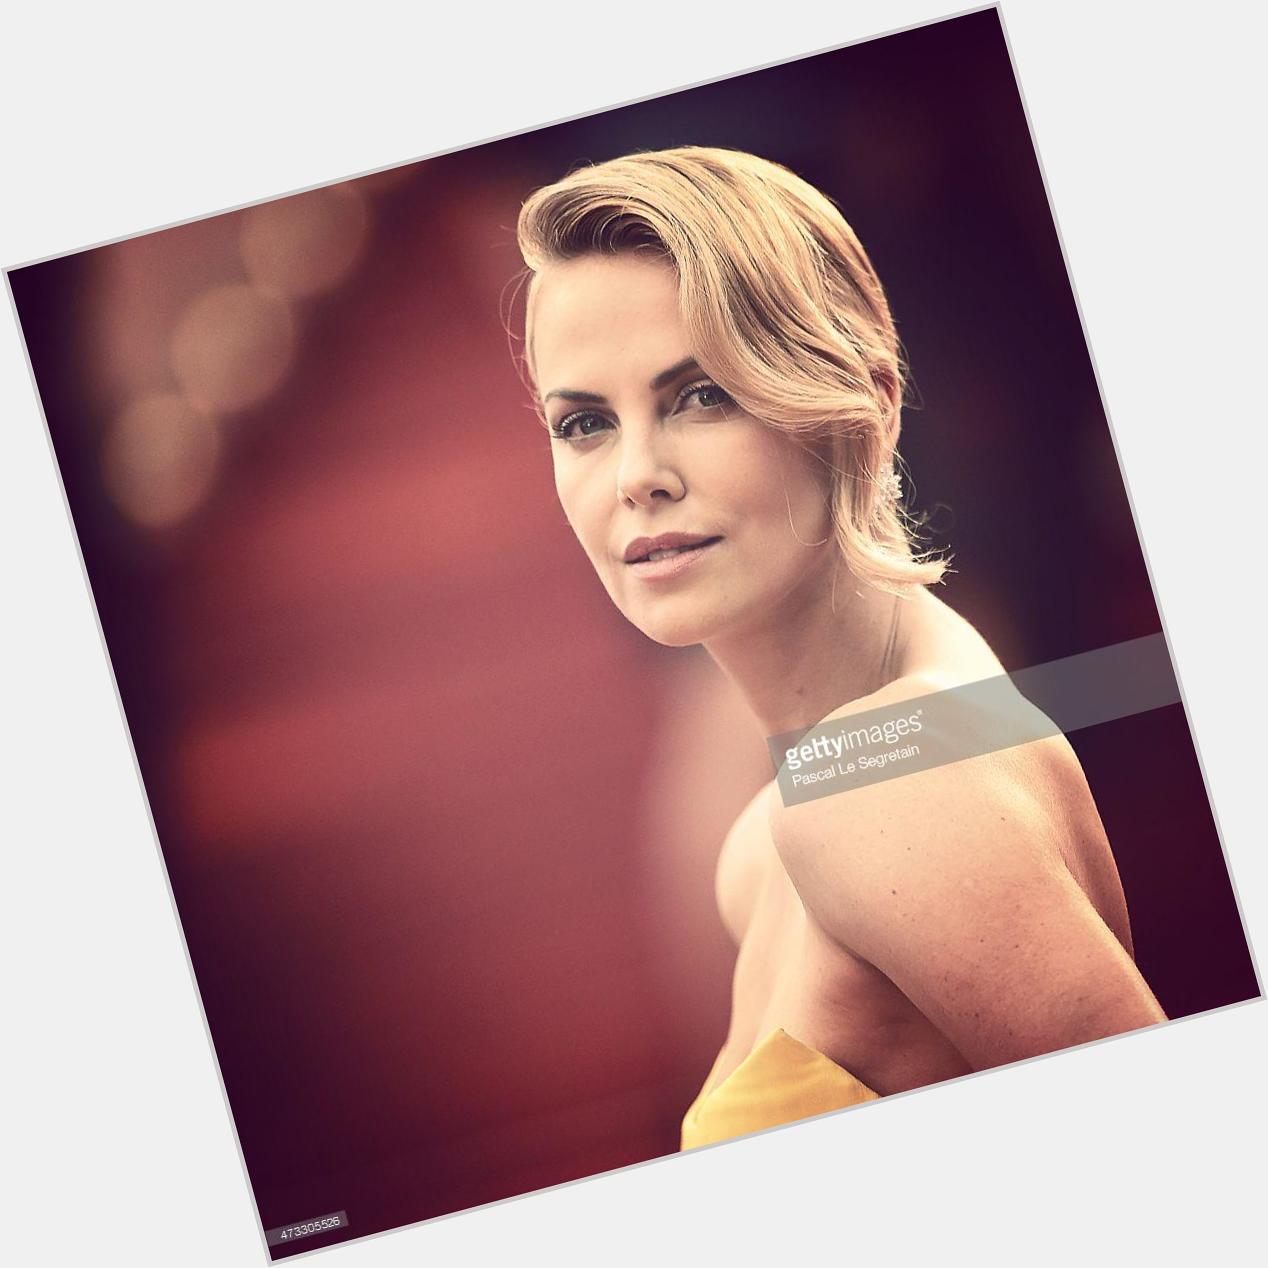 Happy birthday Charlize Theron!  The Academy Award-winning actress turns 40 today   